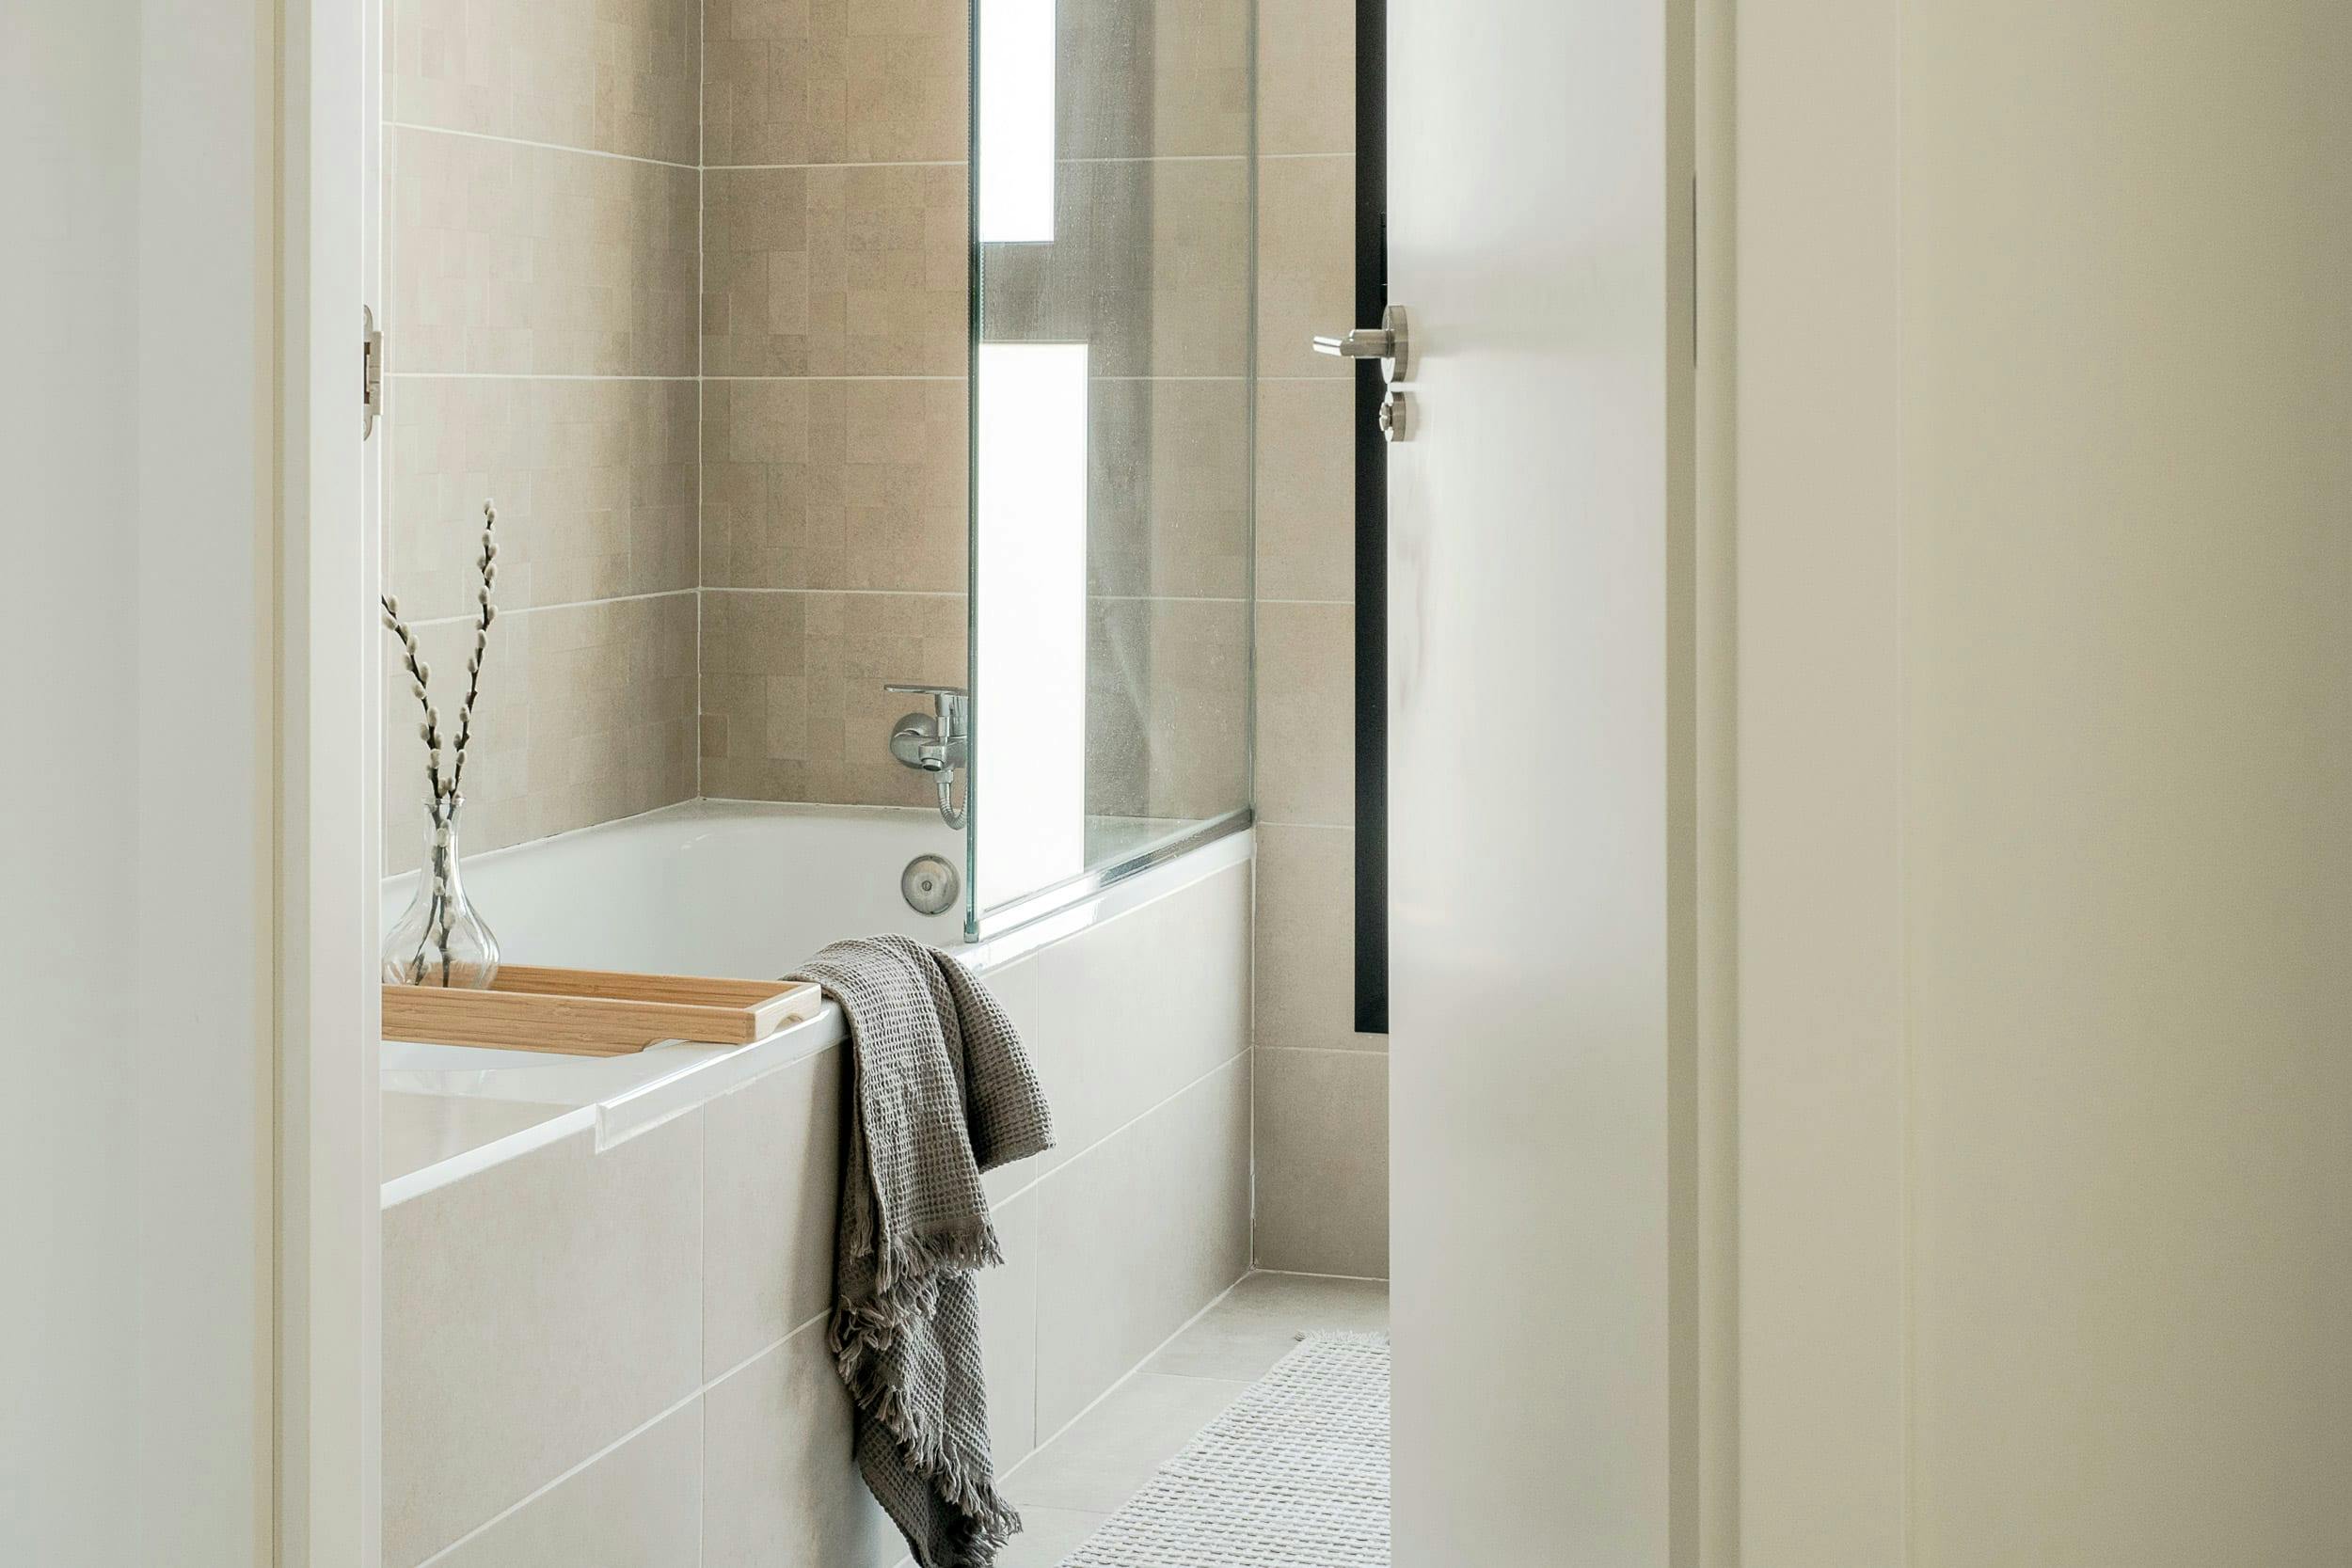 The image features a bathroom with a white bathtub, a window, a sink, and a mirror.